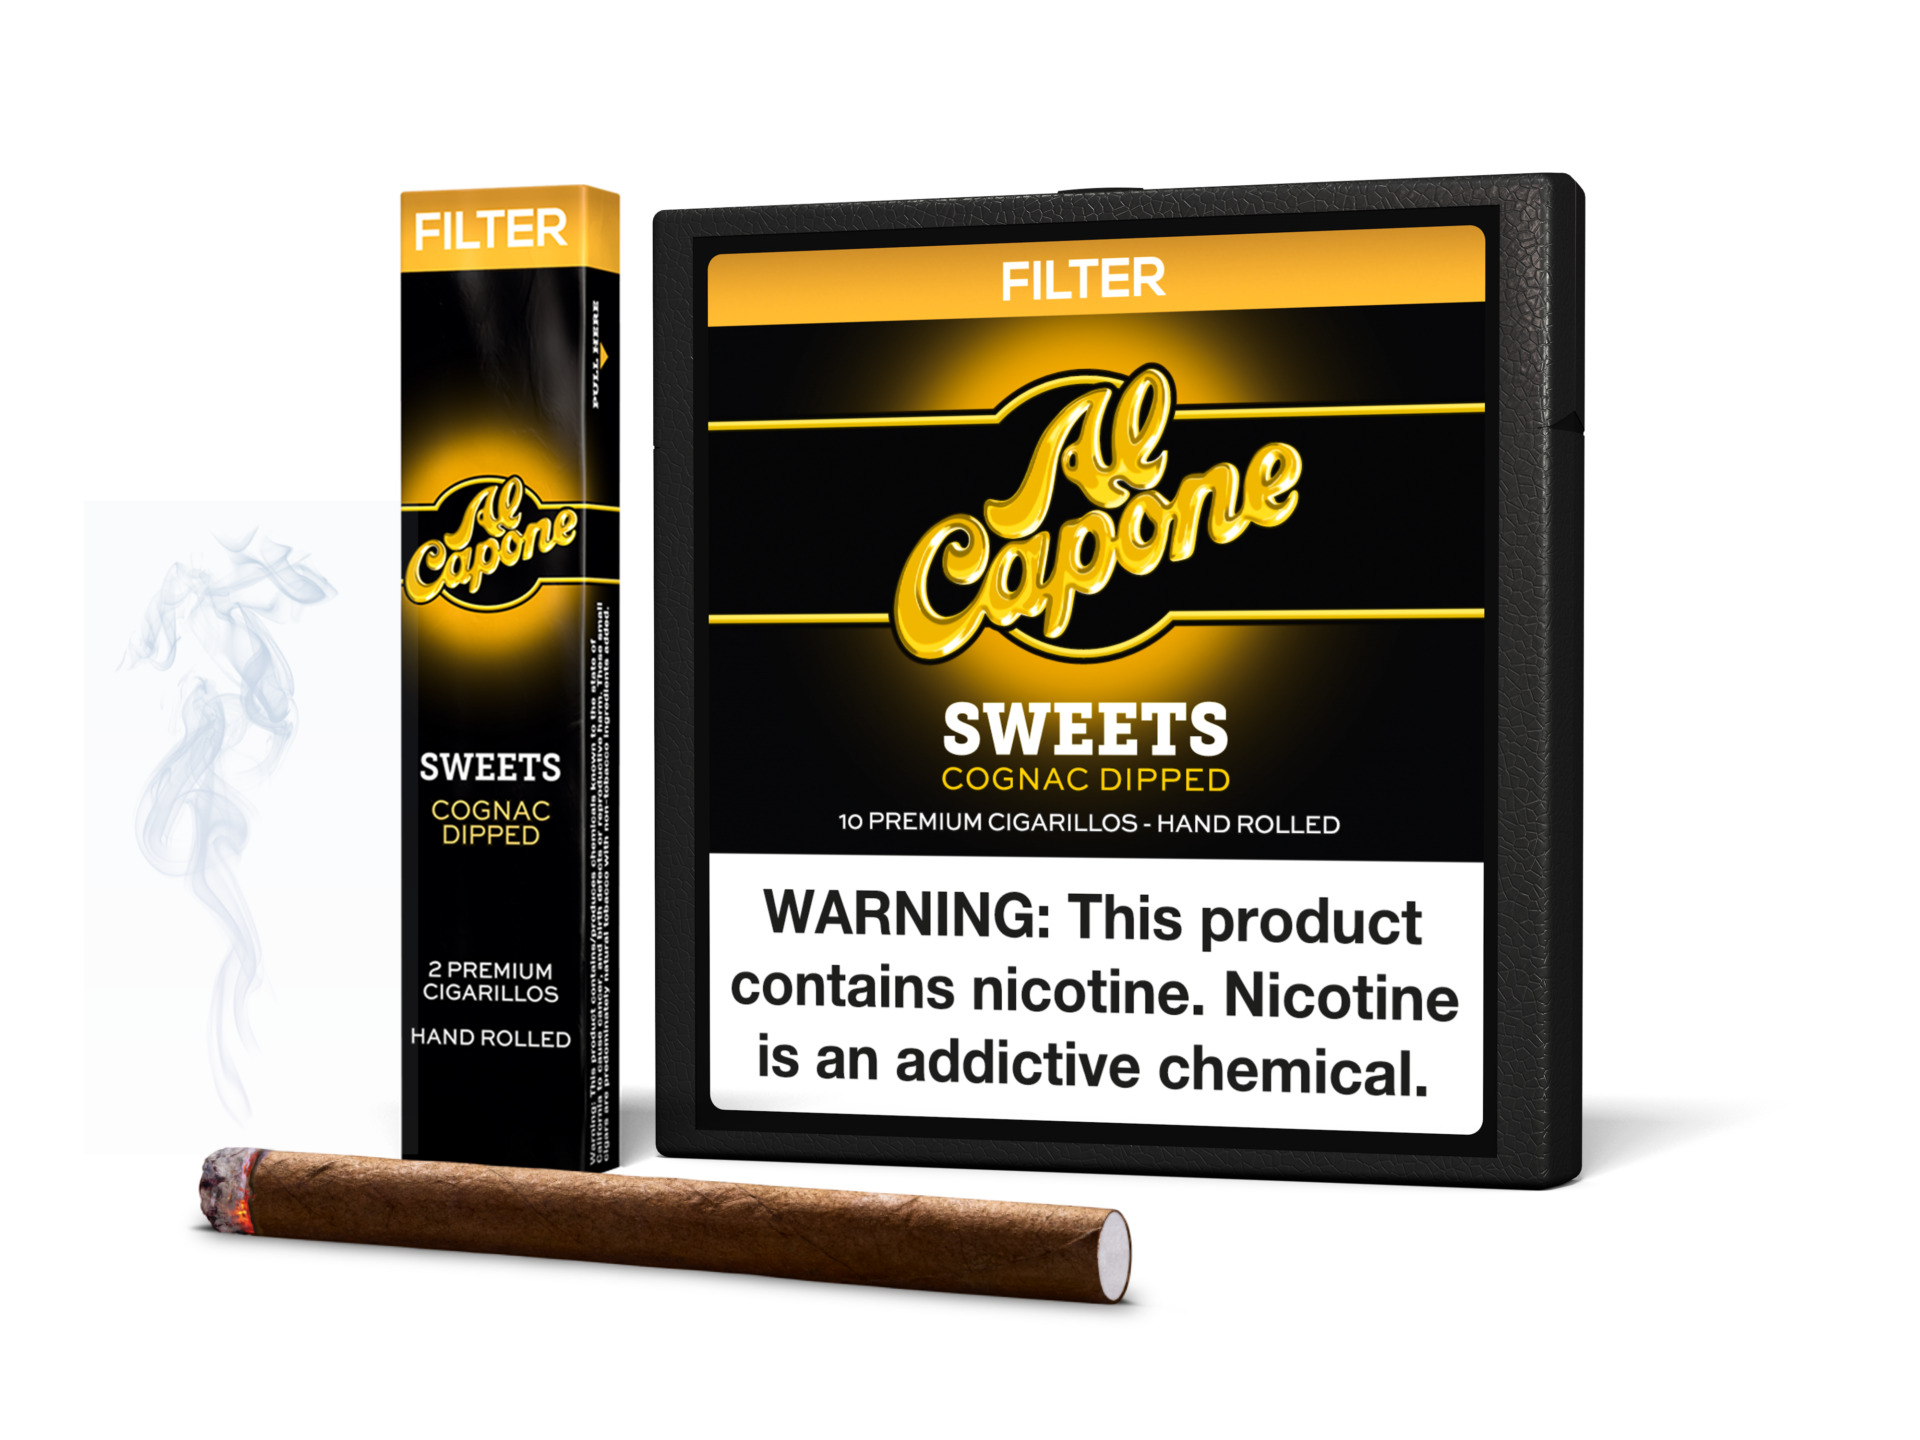 https://www.alcapone-us.com/wp-content/uploads/2021/09/Products-Sweets-Filter-group.png